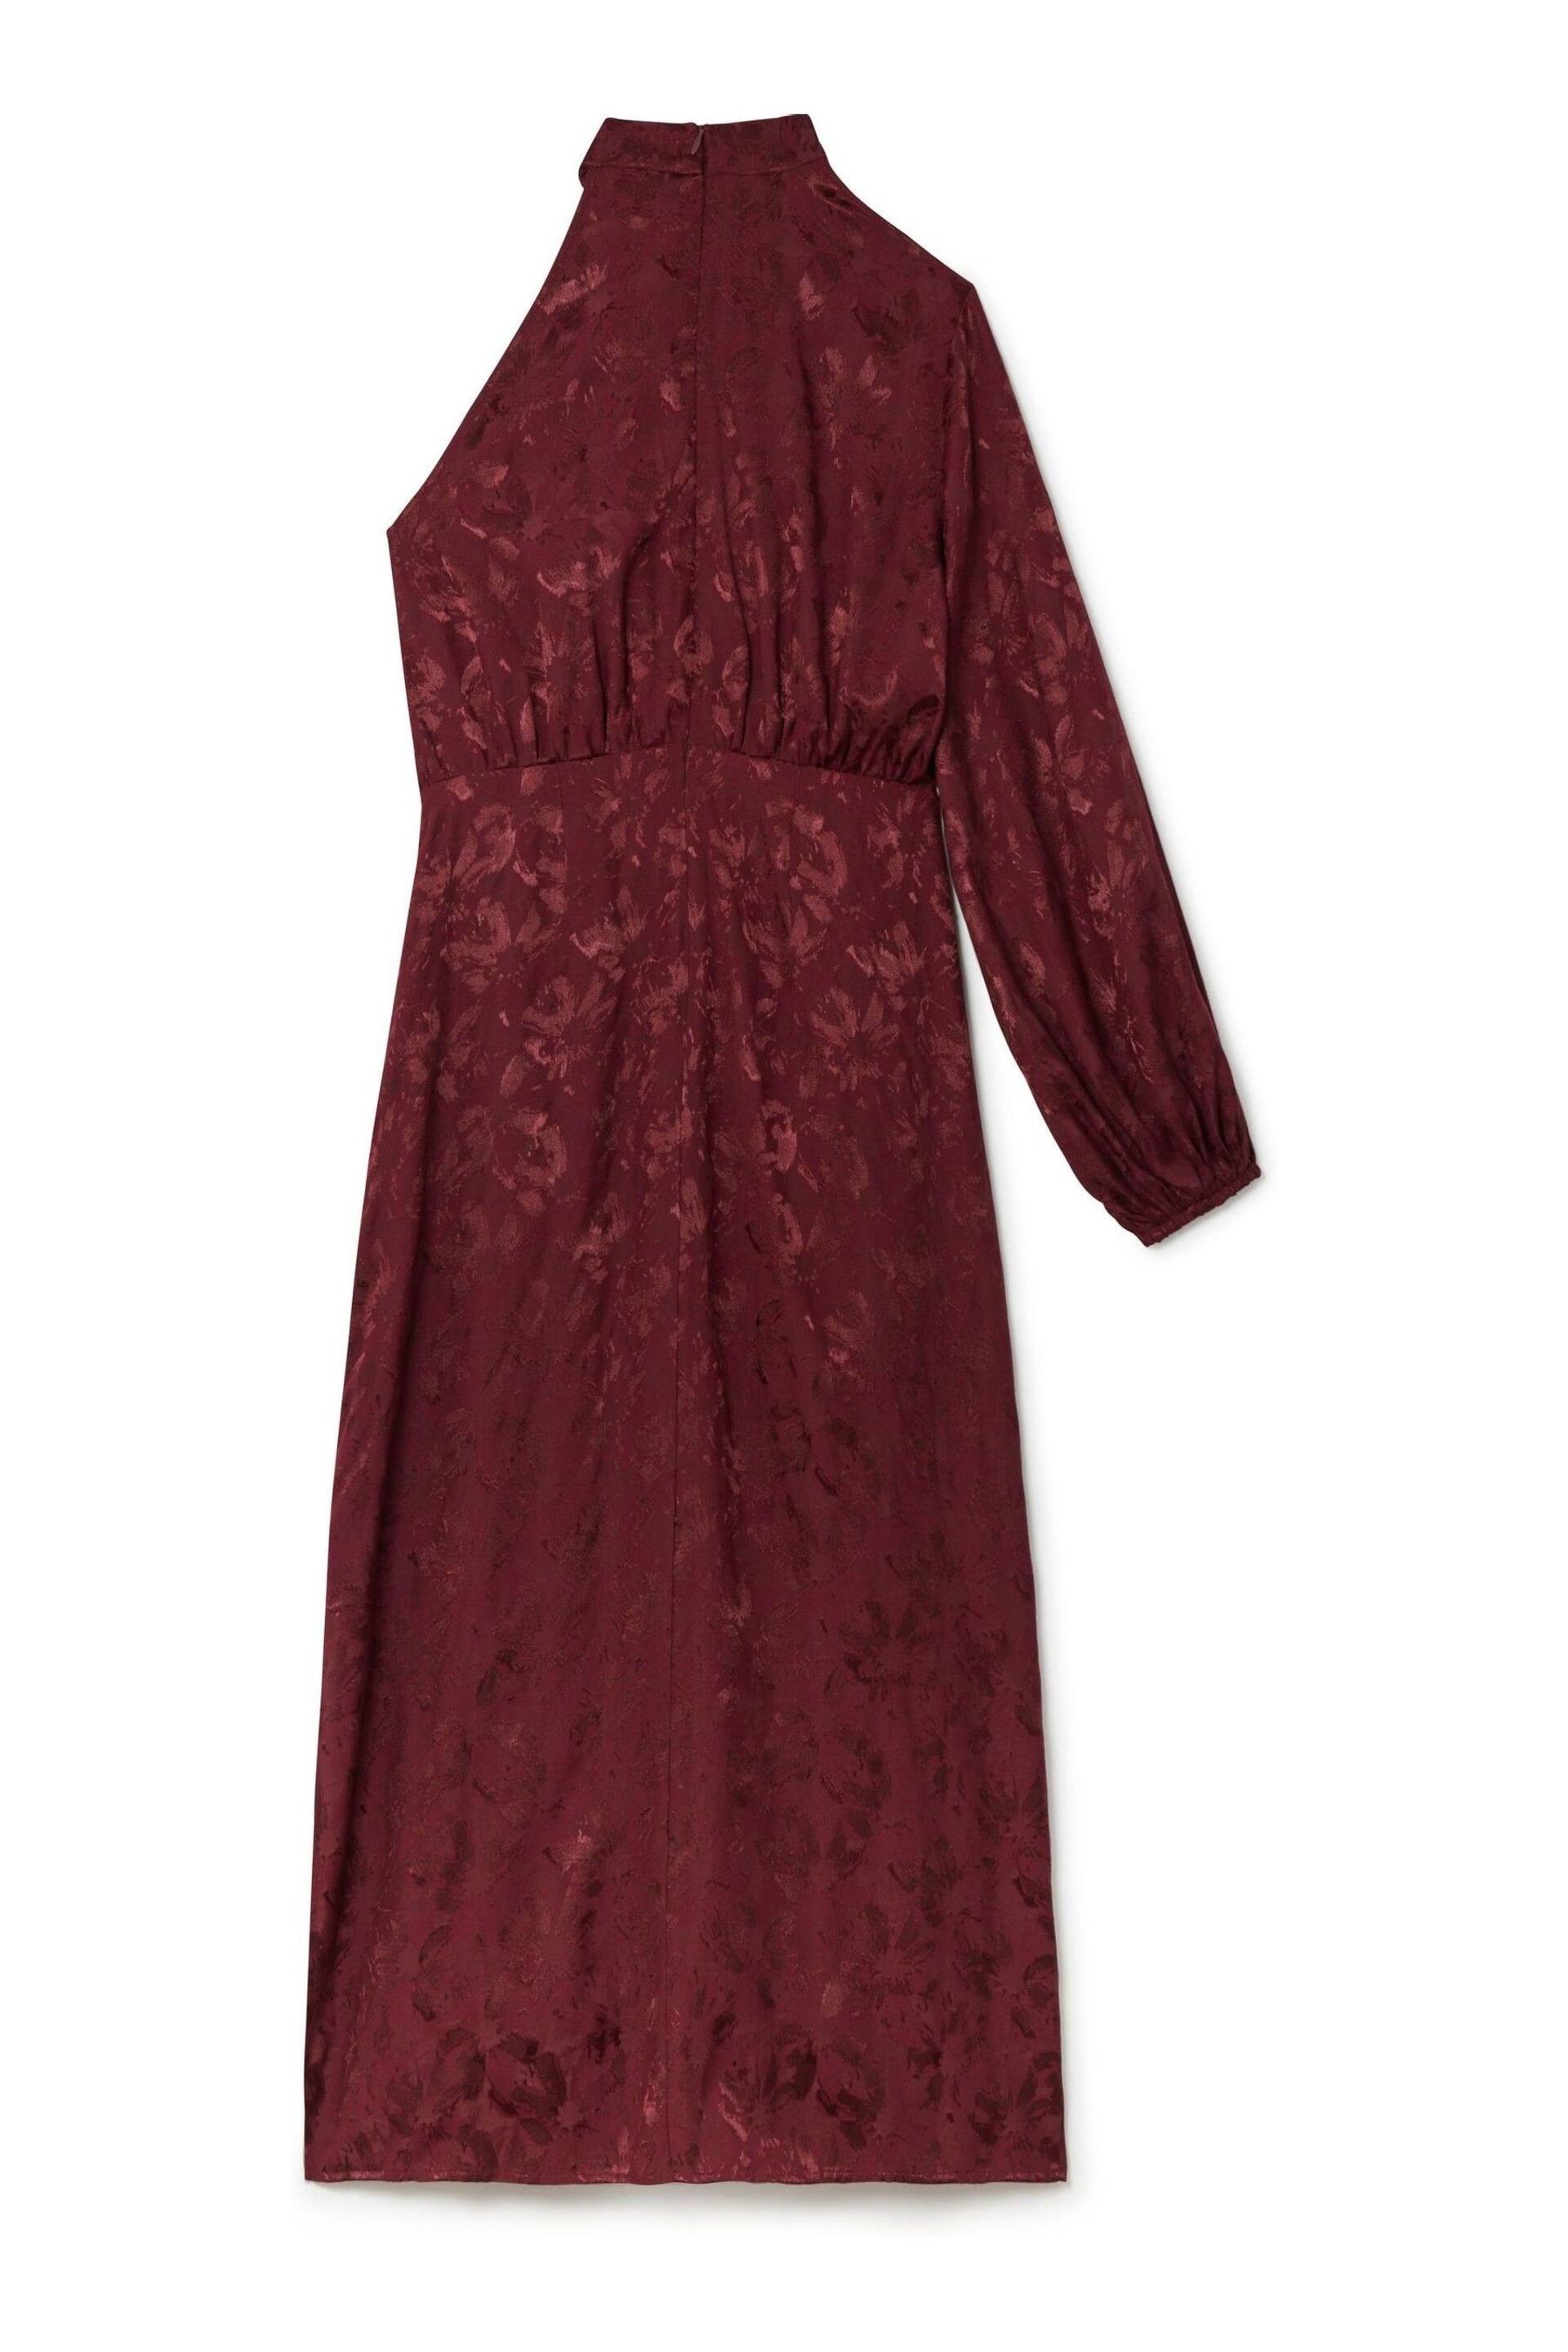 Another Sunday One Shoulder Jacquard Midi Dress With Gold Buttons - Image 7 of 8